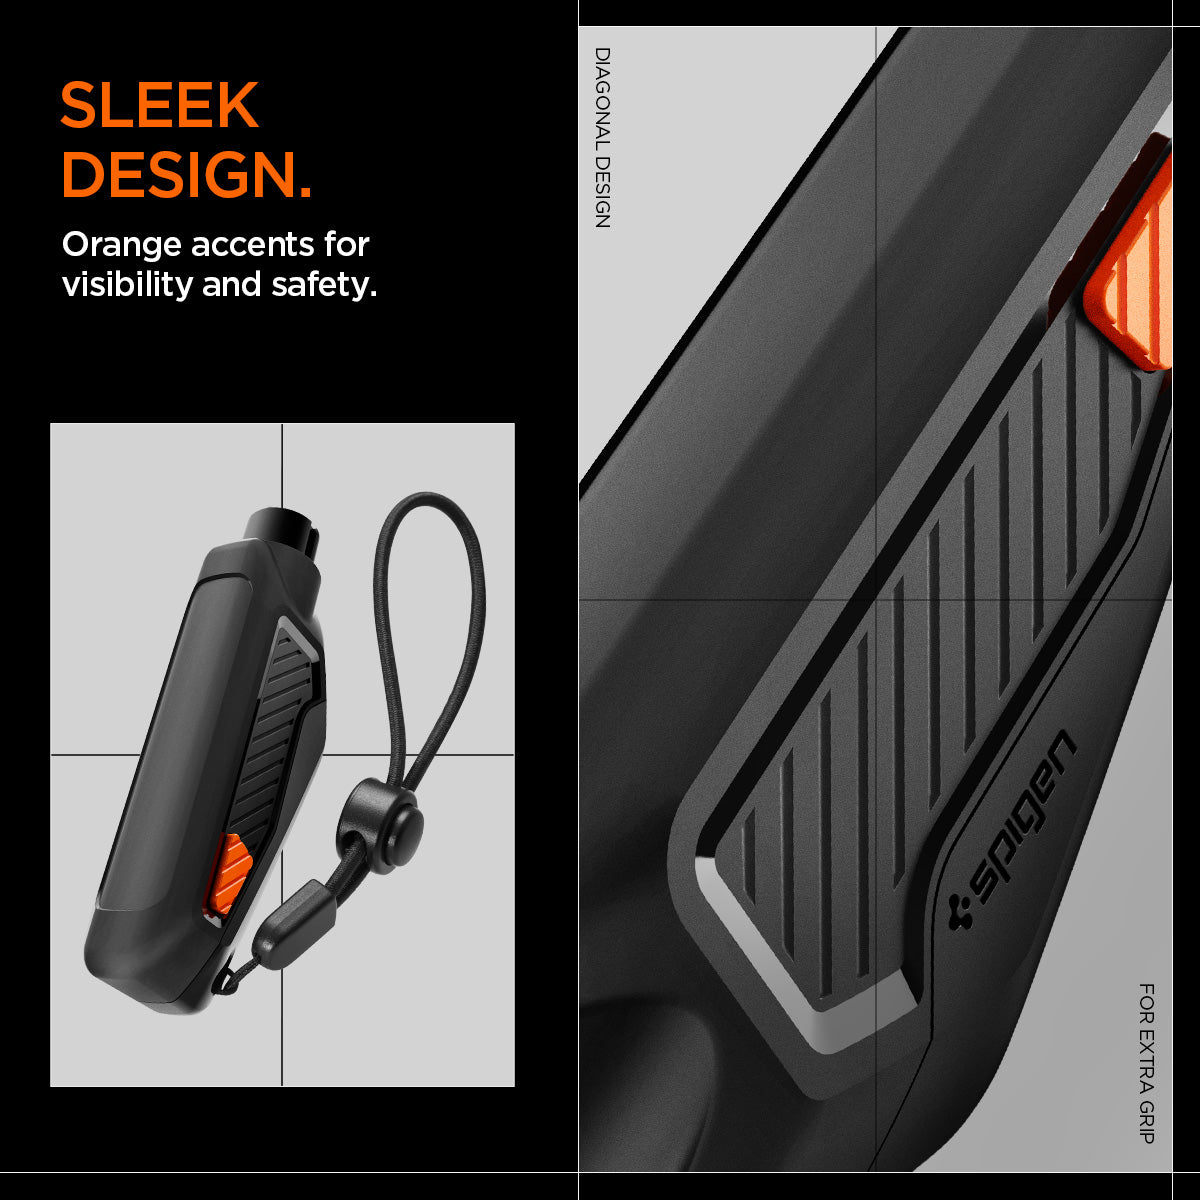 ACP06988 - Car Escape Tool in Black showing the Sleek Design. Orang accents for visibility and safety with diagonal design for extra grip